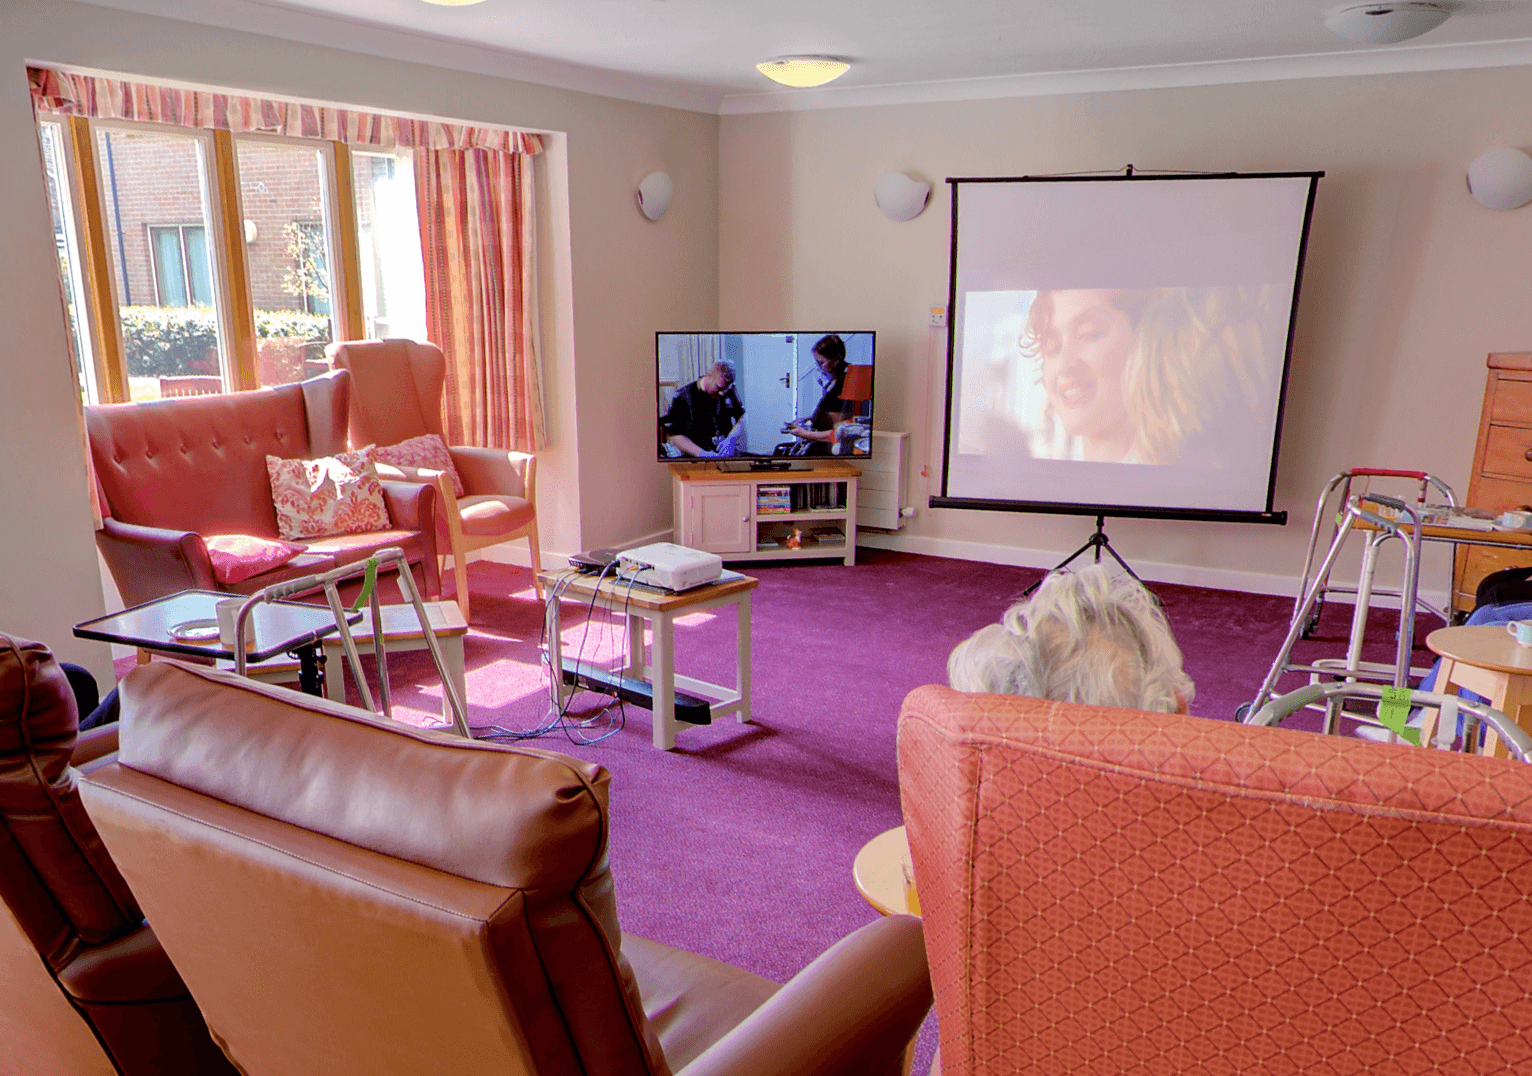 Shaw Healthcare - Deerswood Lodge care home 006